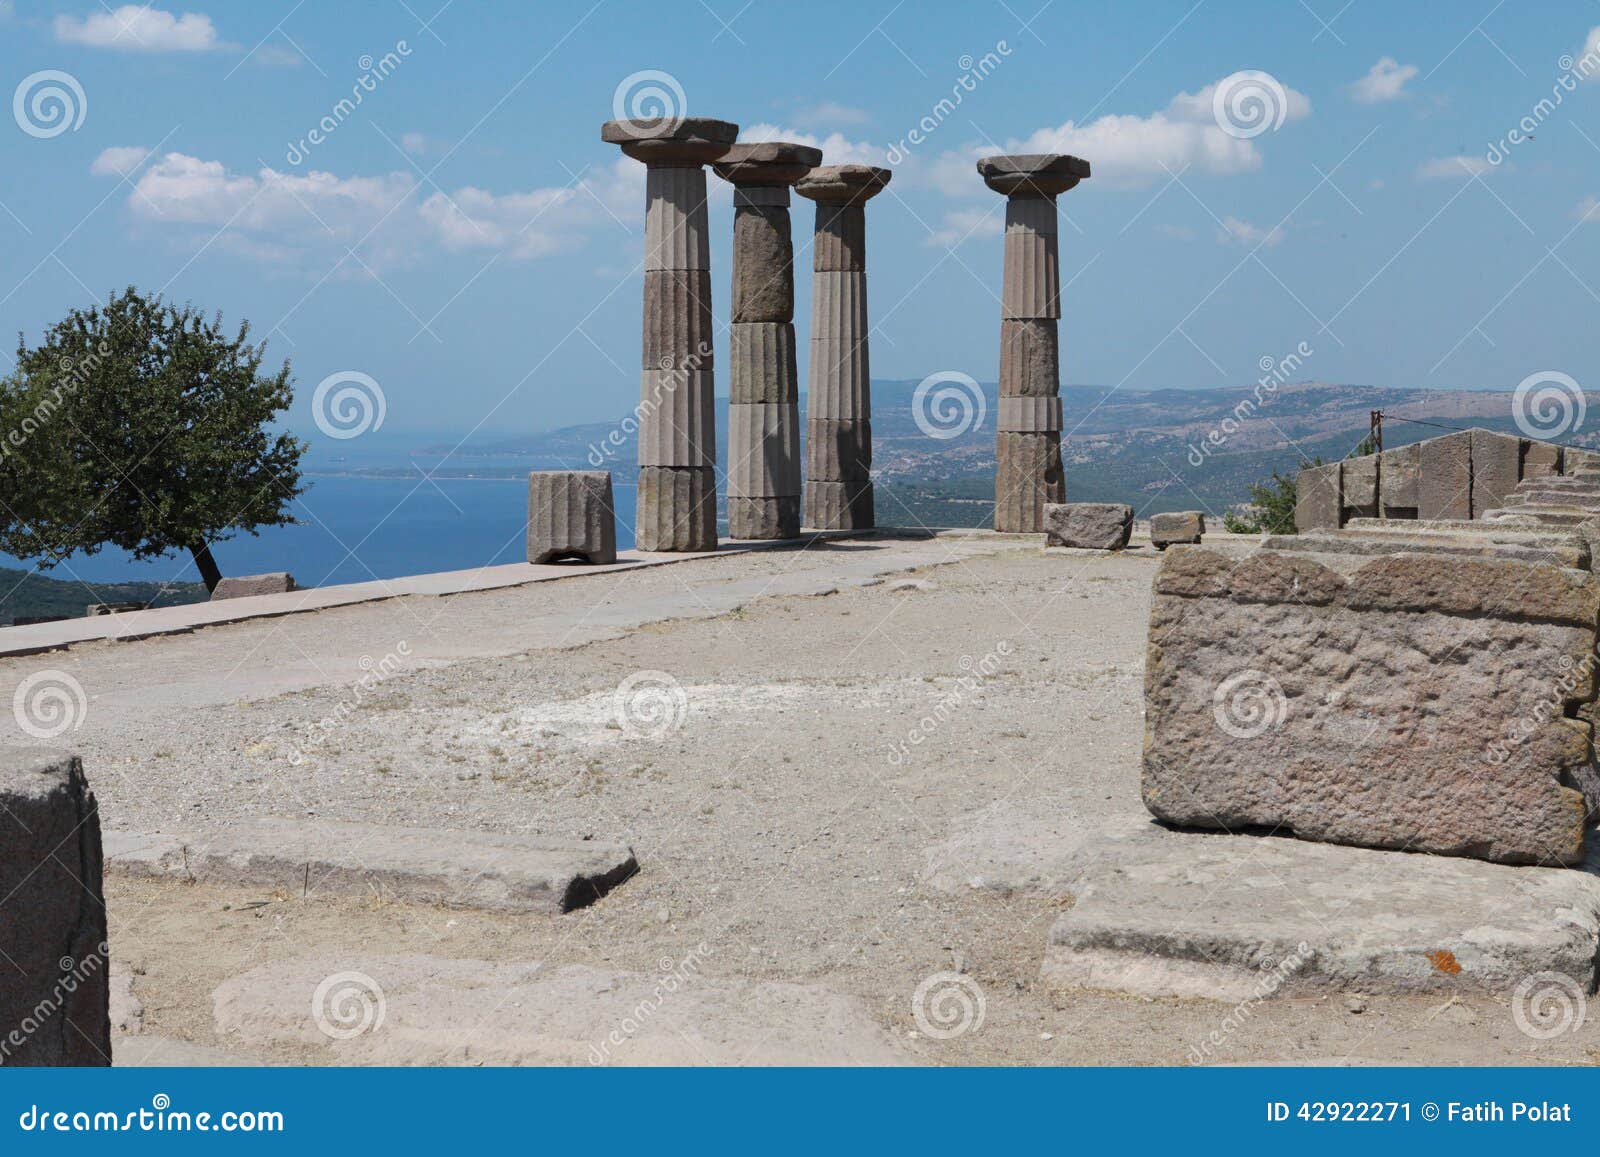 ruins of the temple of athena in assos, canakkale.